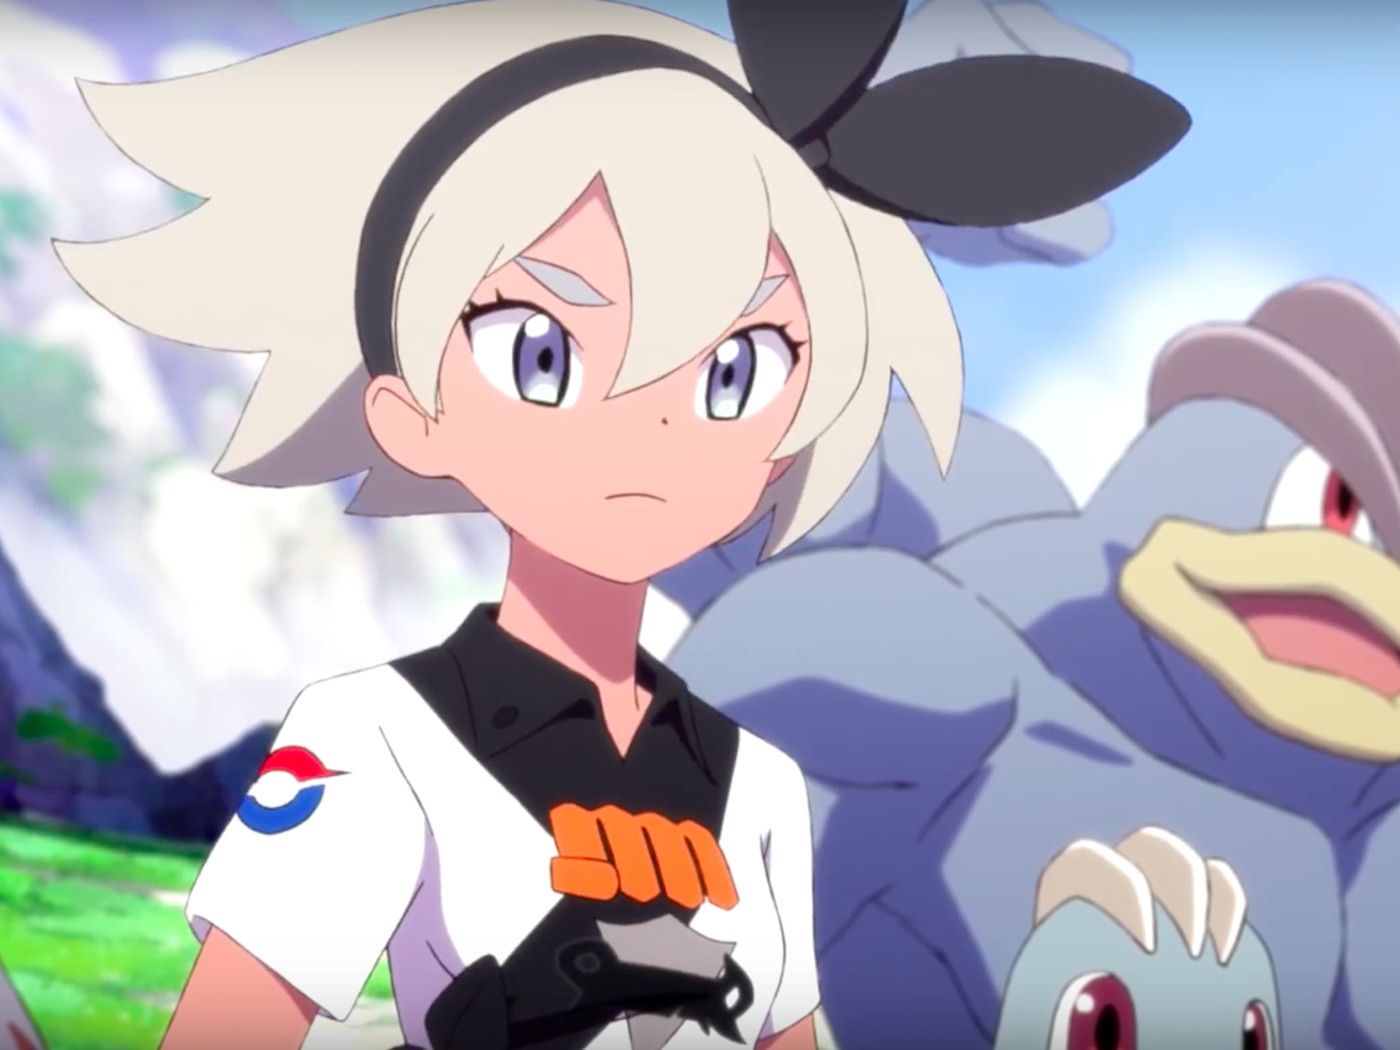 Pokémon Sword and Shield cartoon shows a gym leader dealing with defeat.